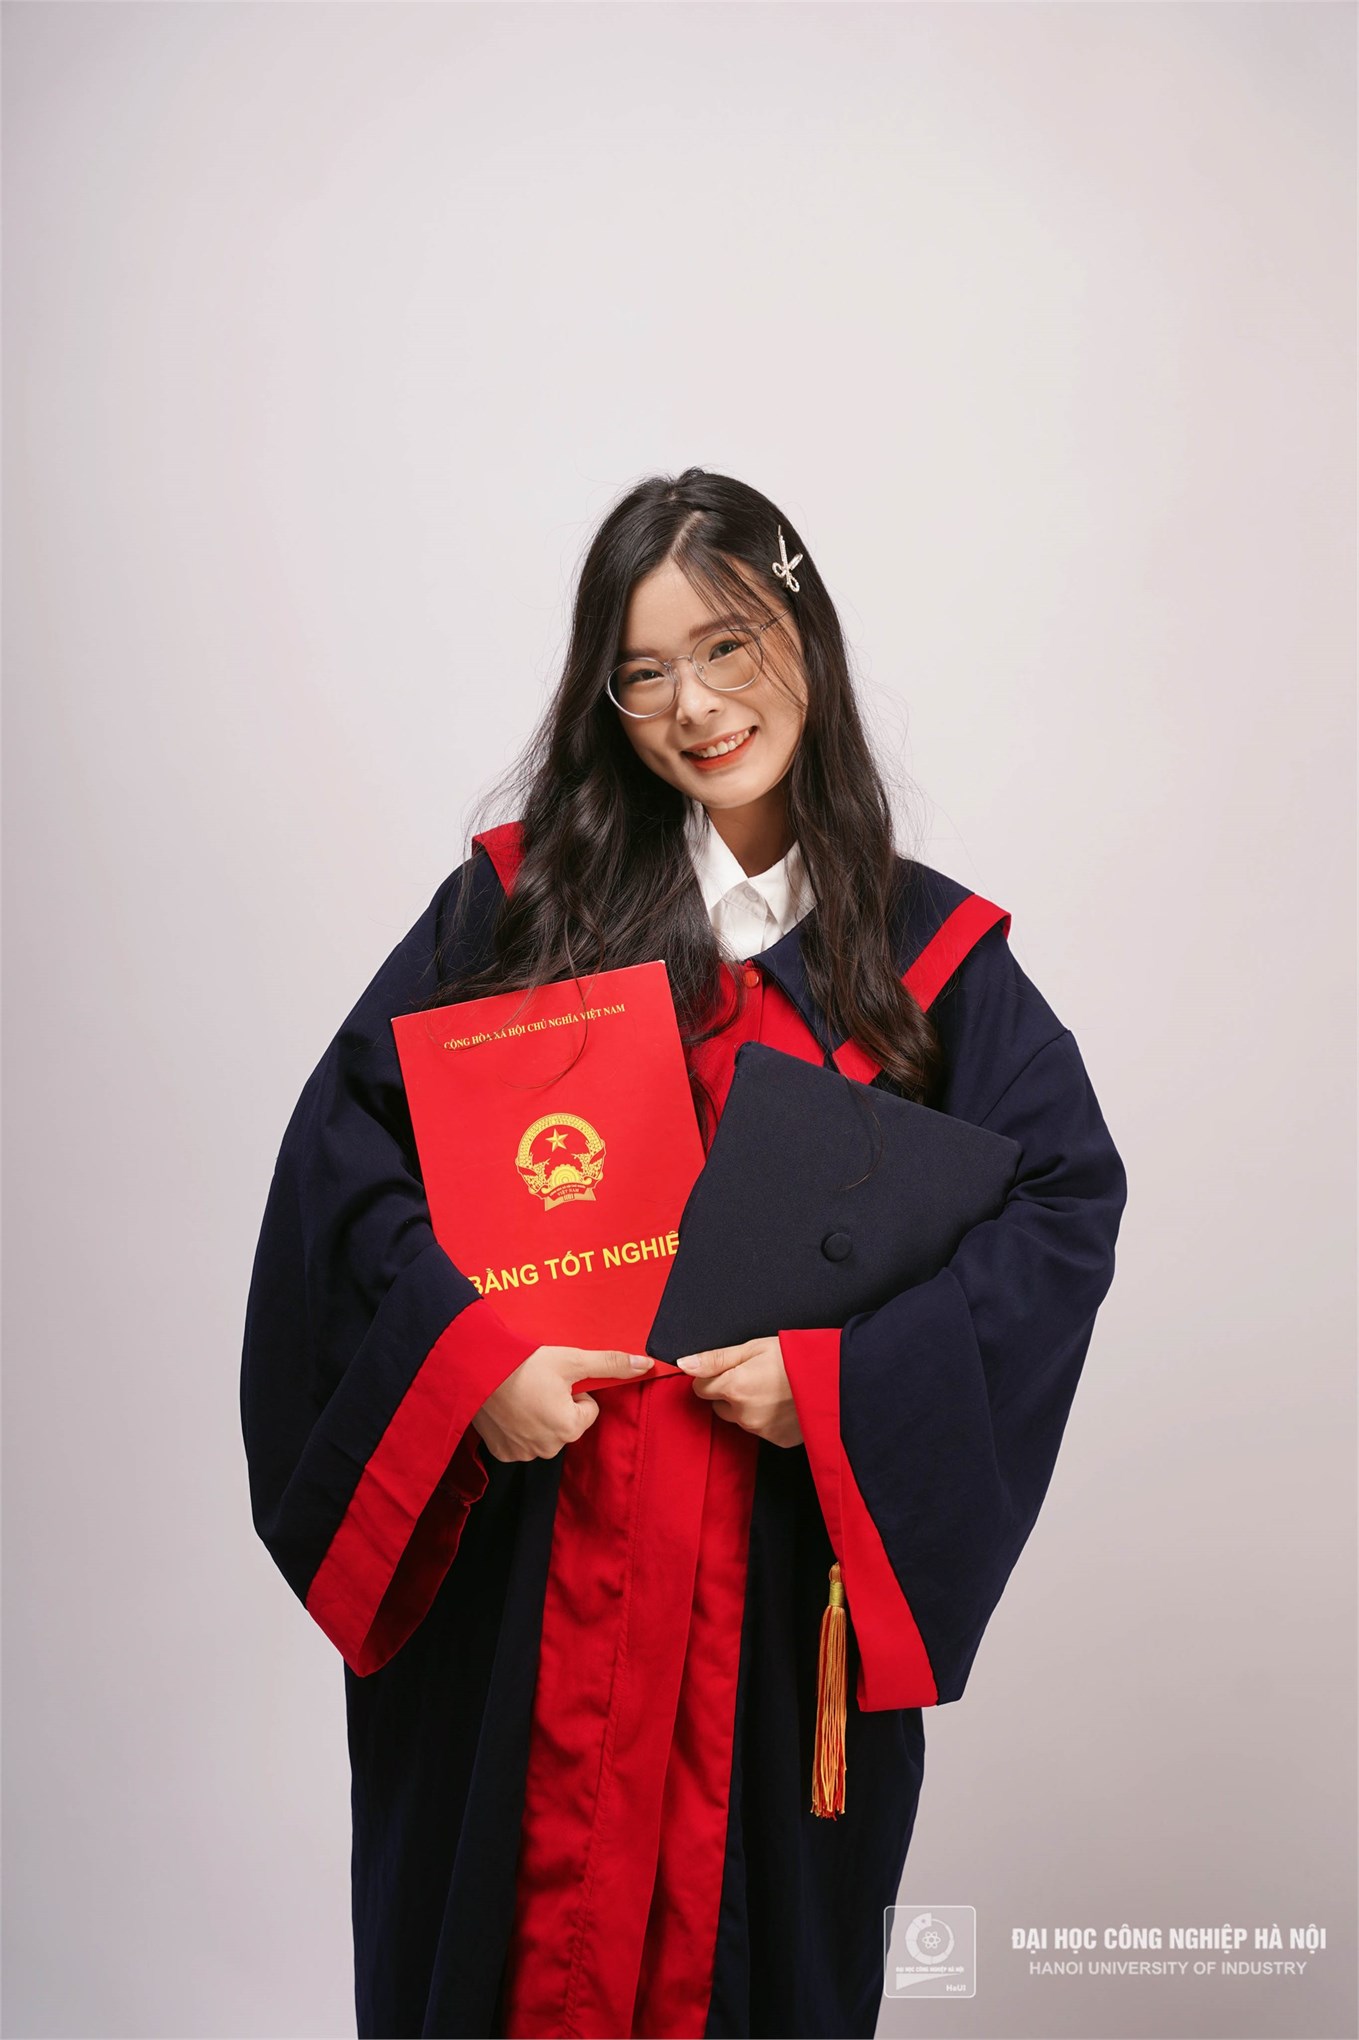 An excellent female student in a Chinese language class received a scholarship of 1 billion VND from the Chinese Government